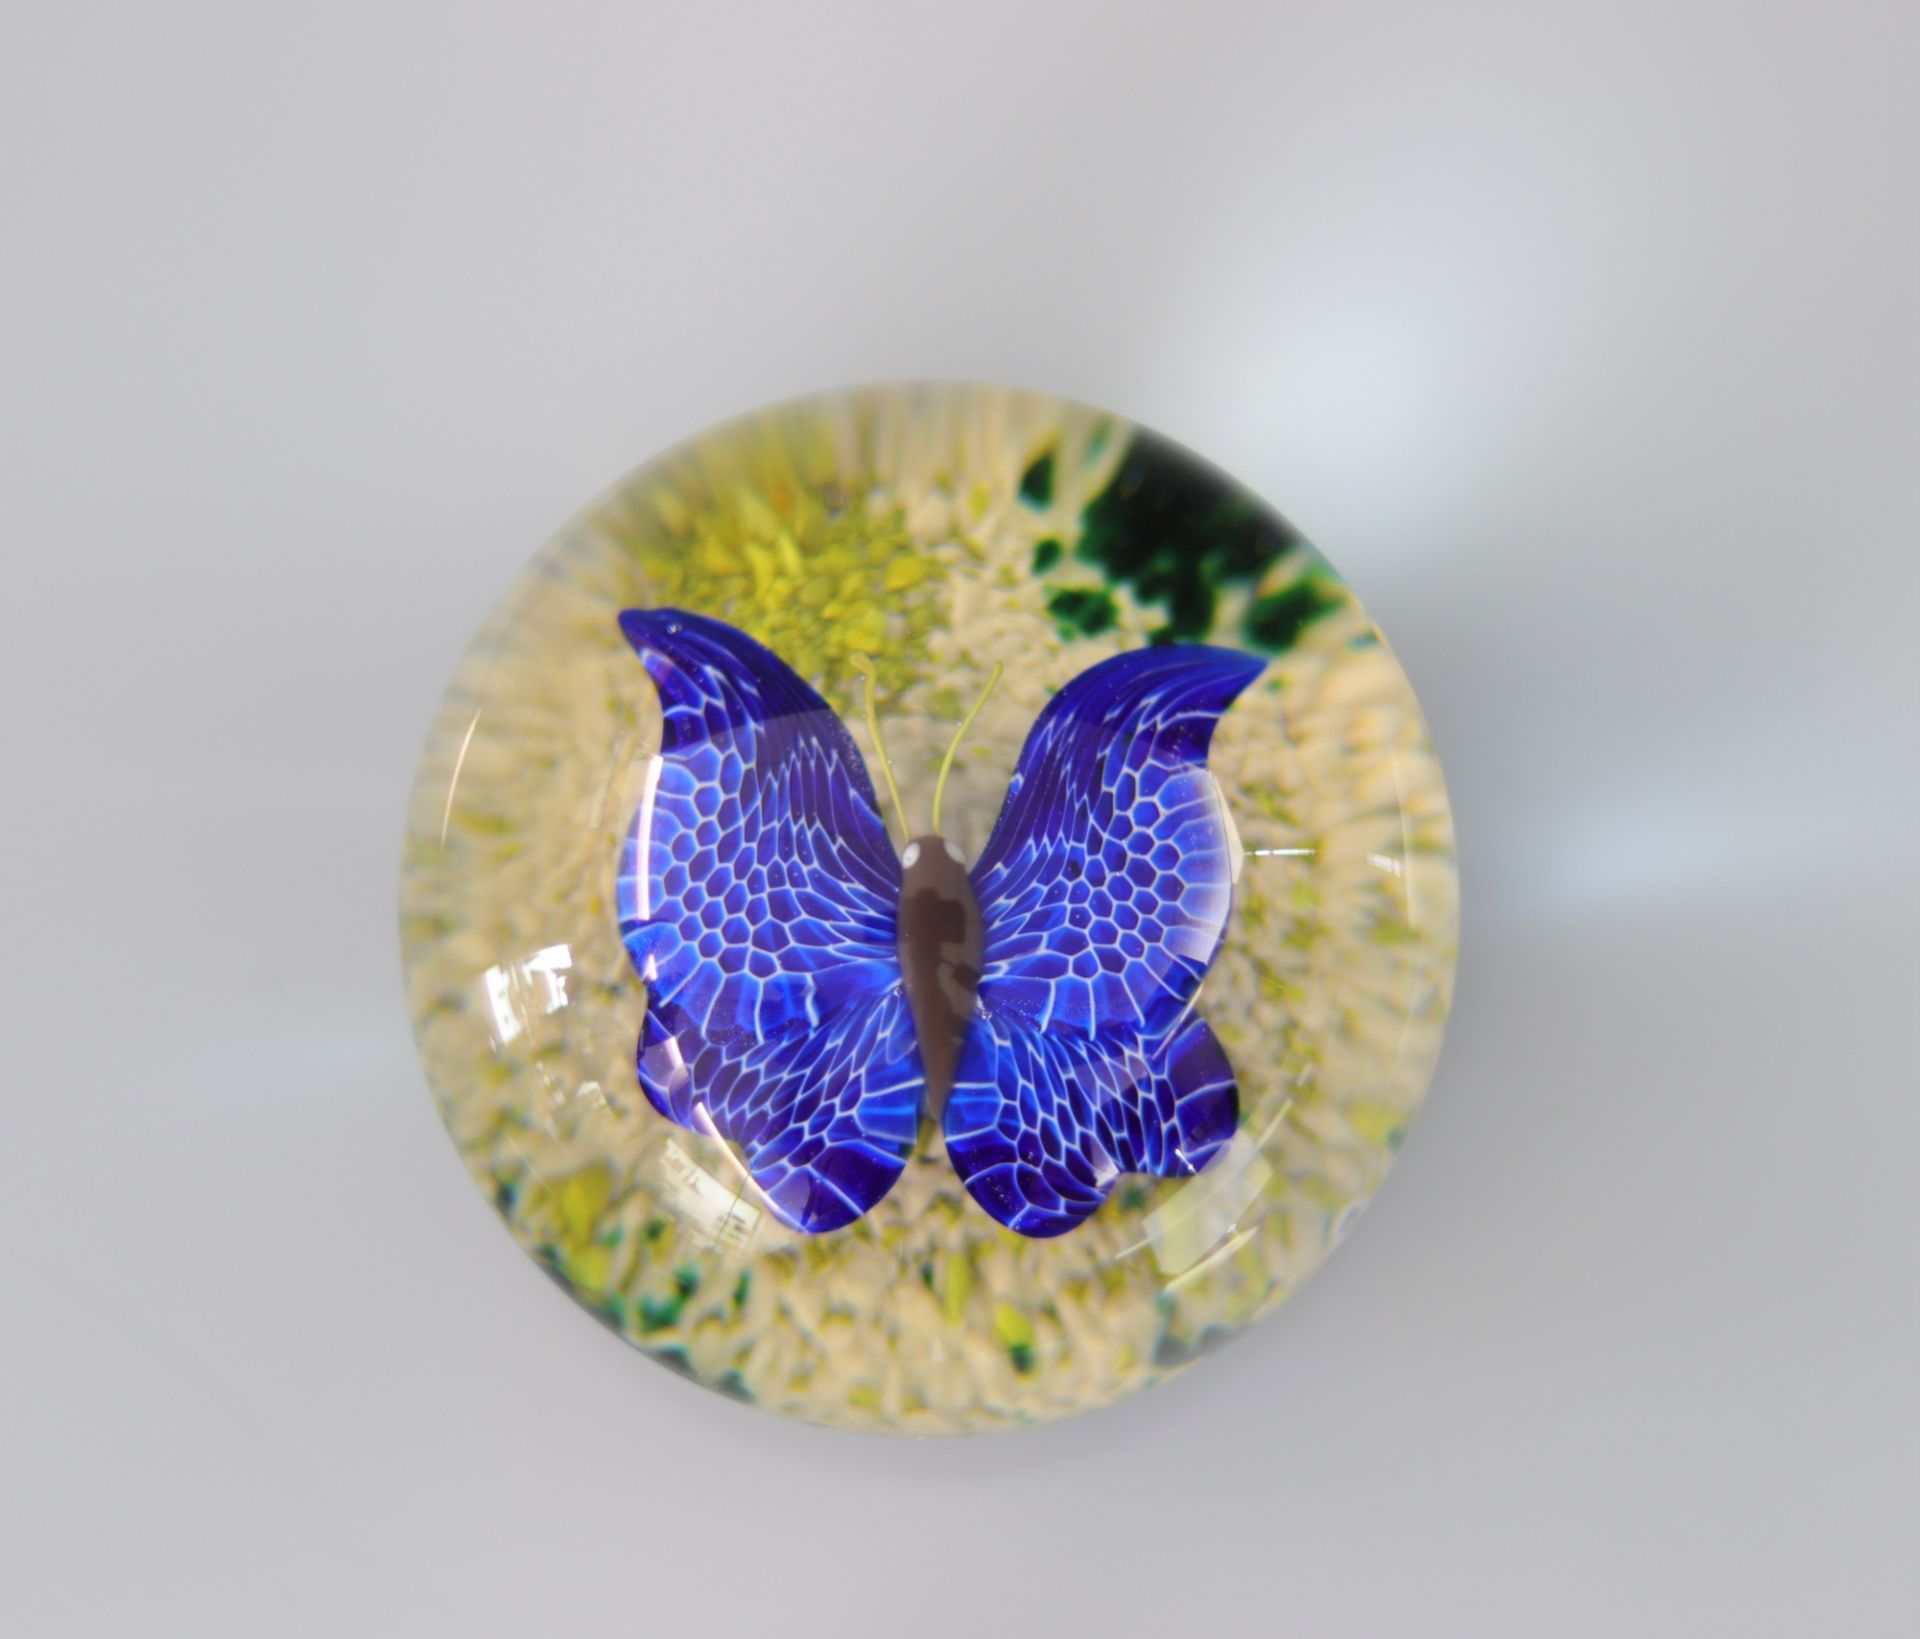 Baccarat paperweight 1978- 23/125, with canes and butterfly on a rocky background